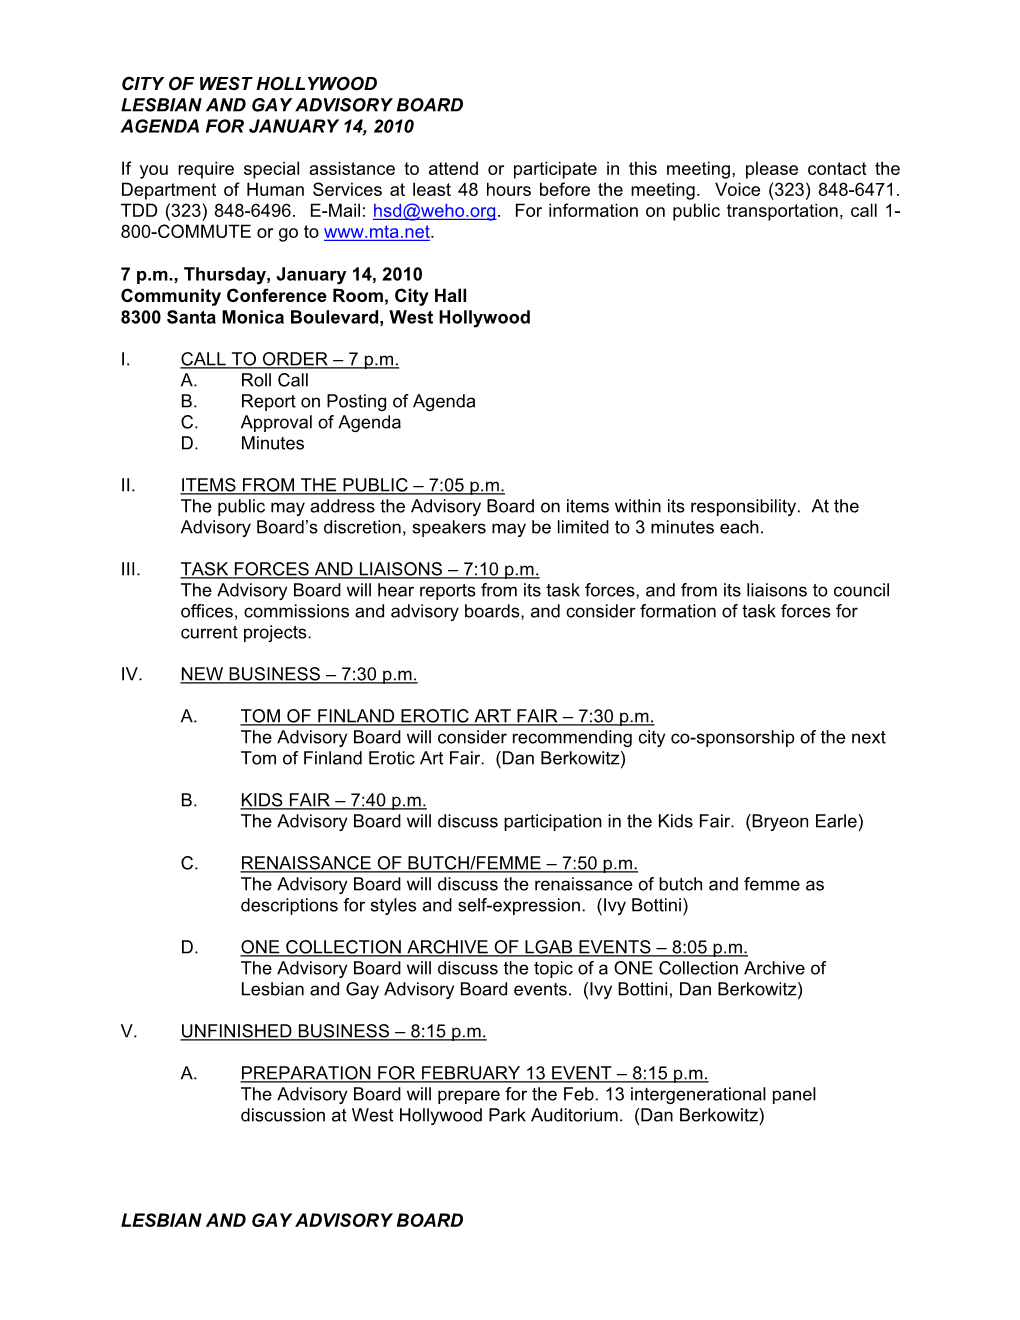 City of West Hollywood Lesbian and Gay Advisory Board Agenda for January 14, 2010